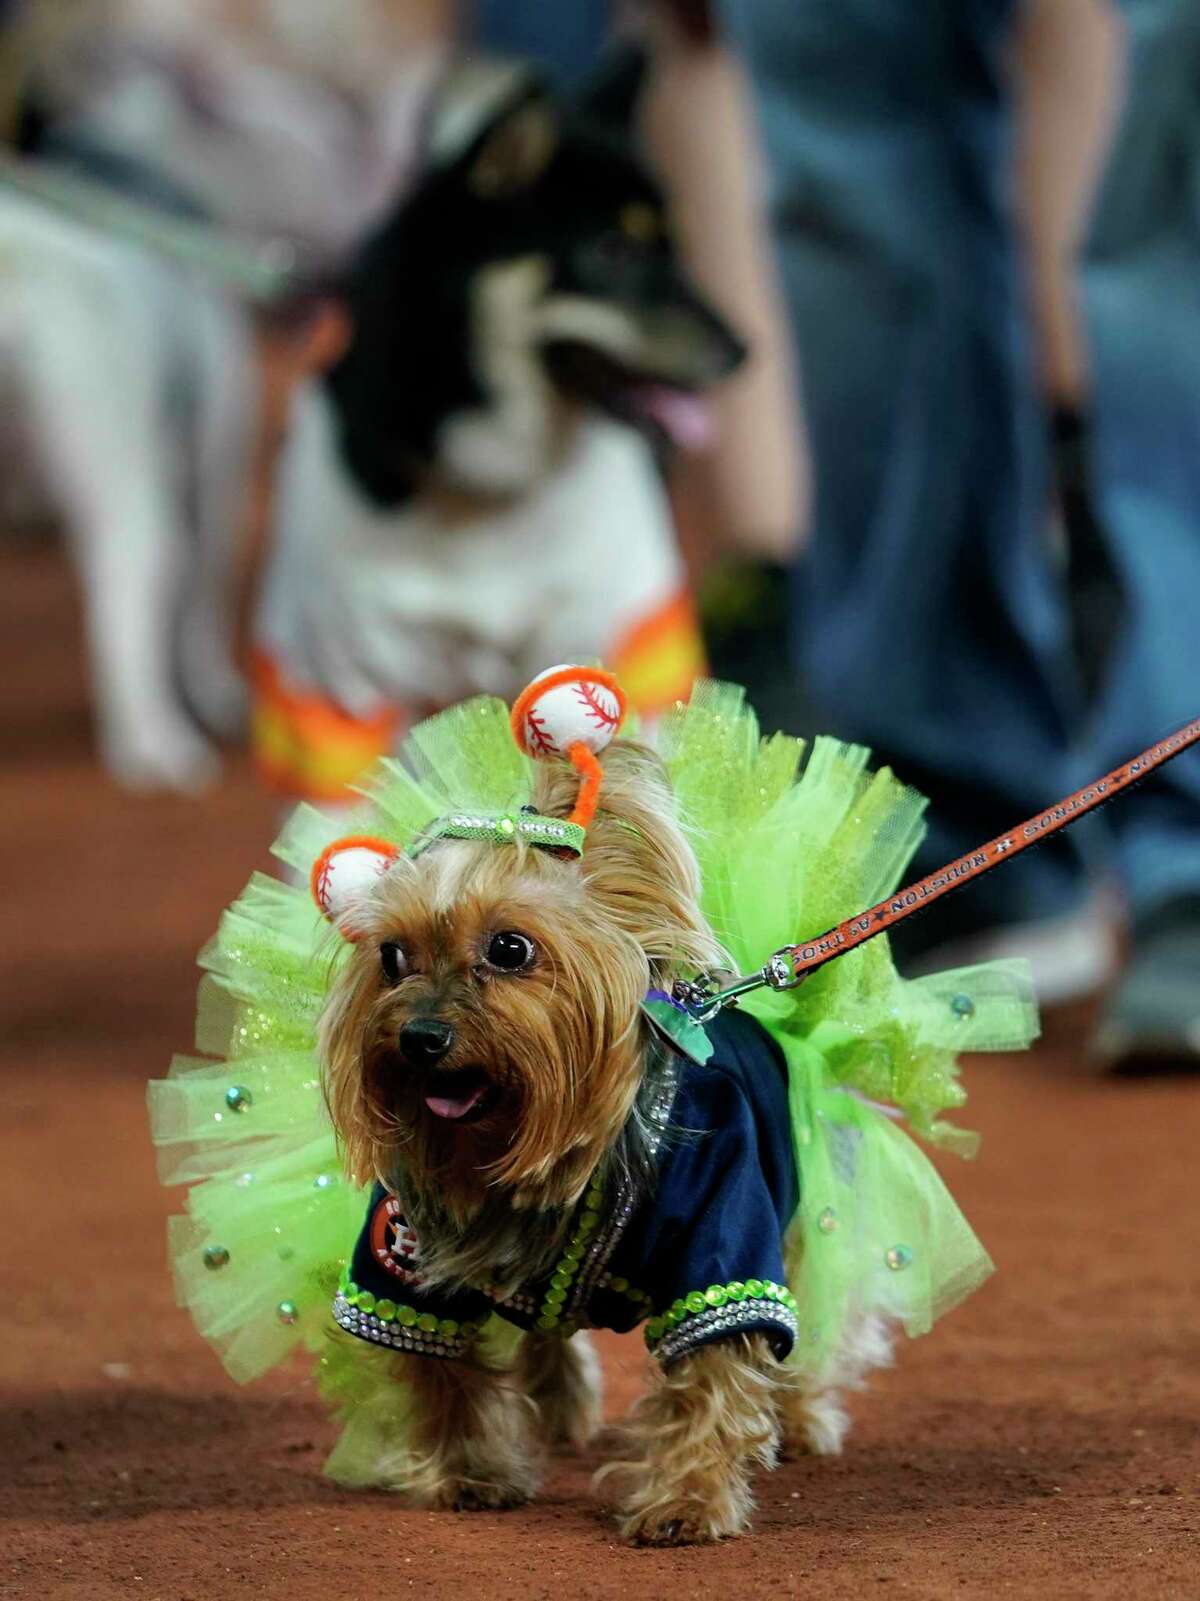 Dogs and their owners parade around the field during the annual Astros Dog Day held before the Houston Astros and Los Angeles MLB Game at Minute Maid Park Sunday, Aug. 25, 2019, in Houston.